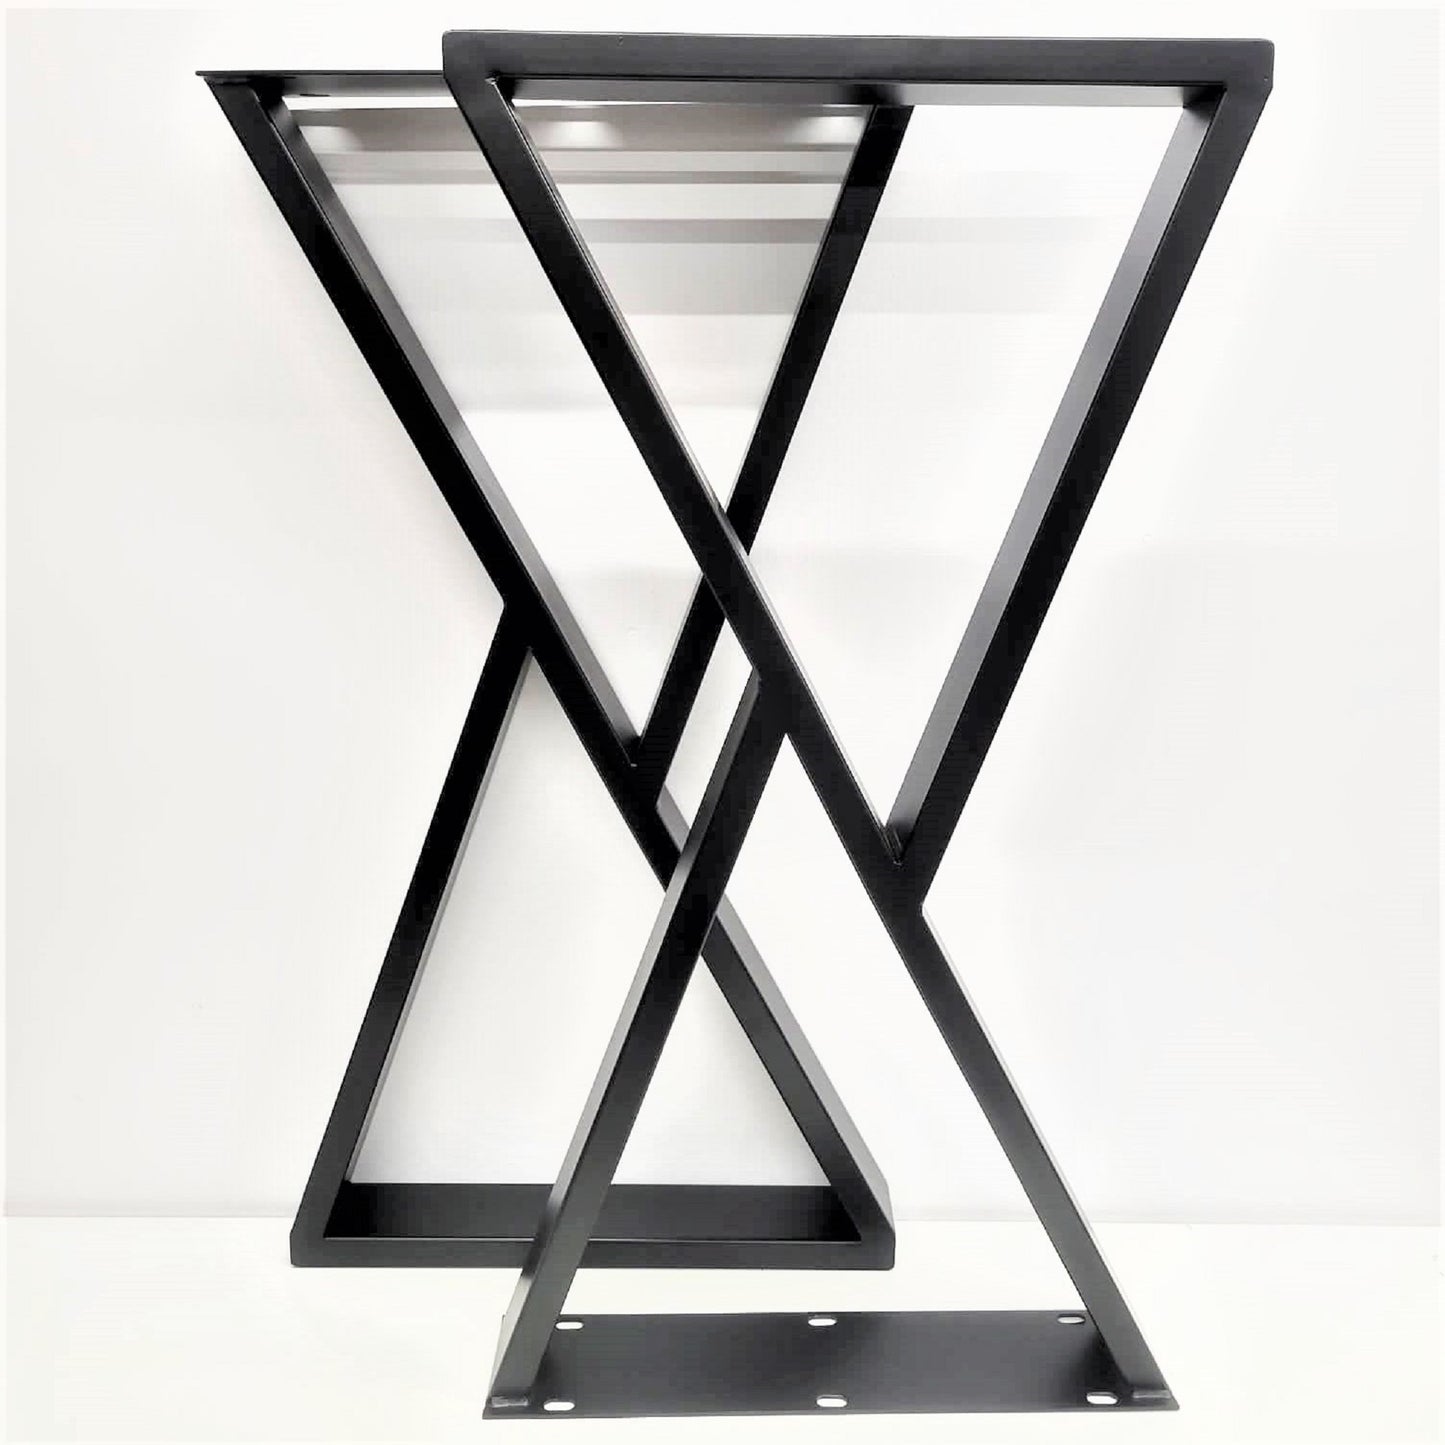 Metal Legs, Furniture Legs, Counter Height Legs, Counter Table Legs, Z Shape Legs, Table Base, Desk Base, Metal Base for Table